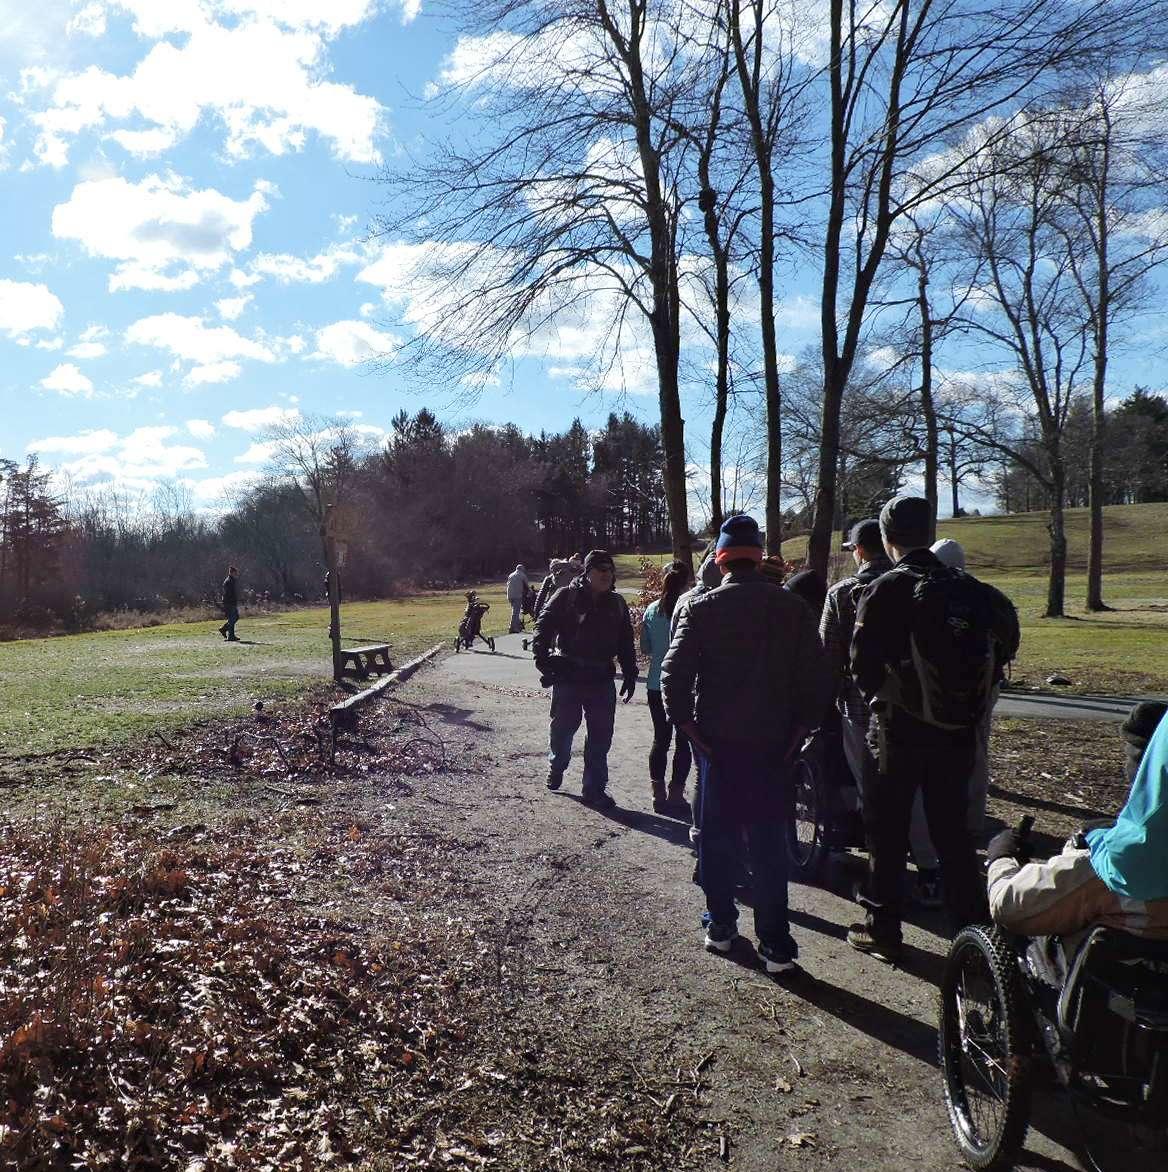 A group of hikers sets off on a flat trail. One of the hikers is using a wheelchair.